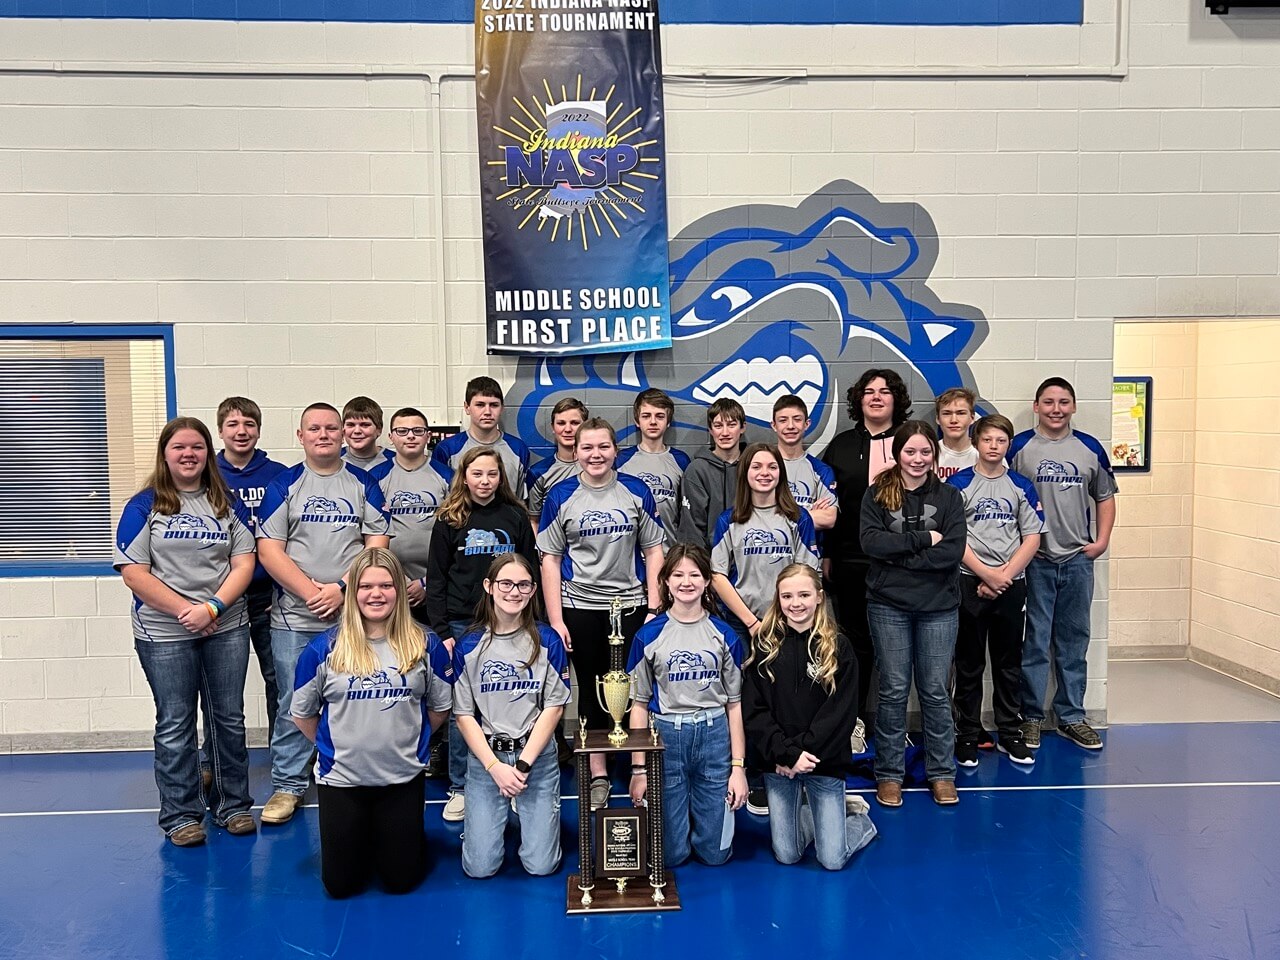 Batesville Middle School placed first in the Indiana State Archery Tournament